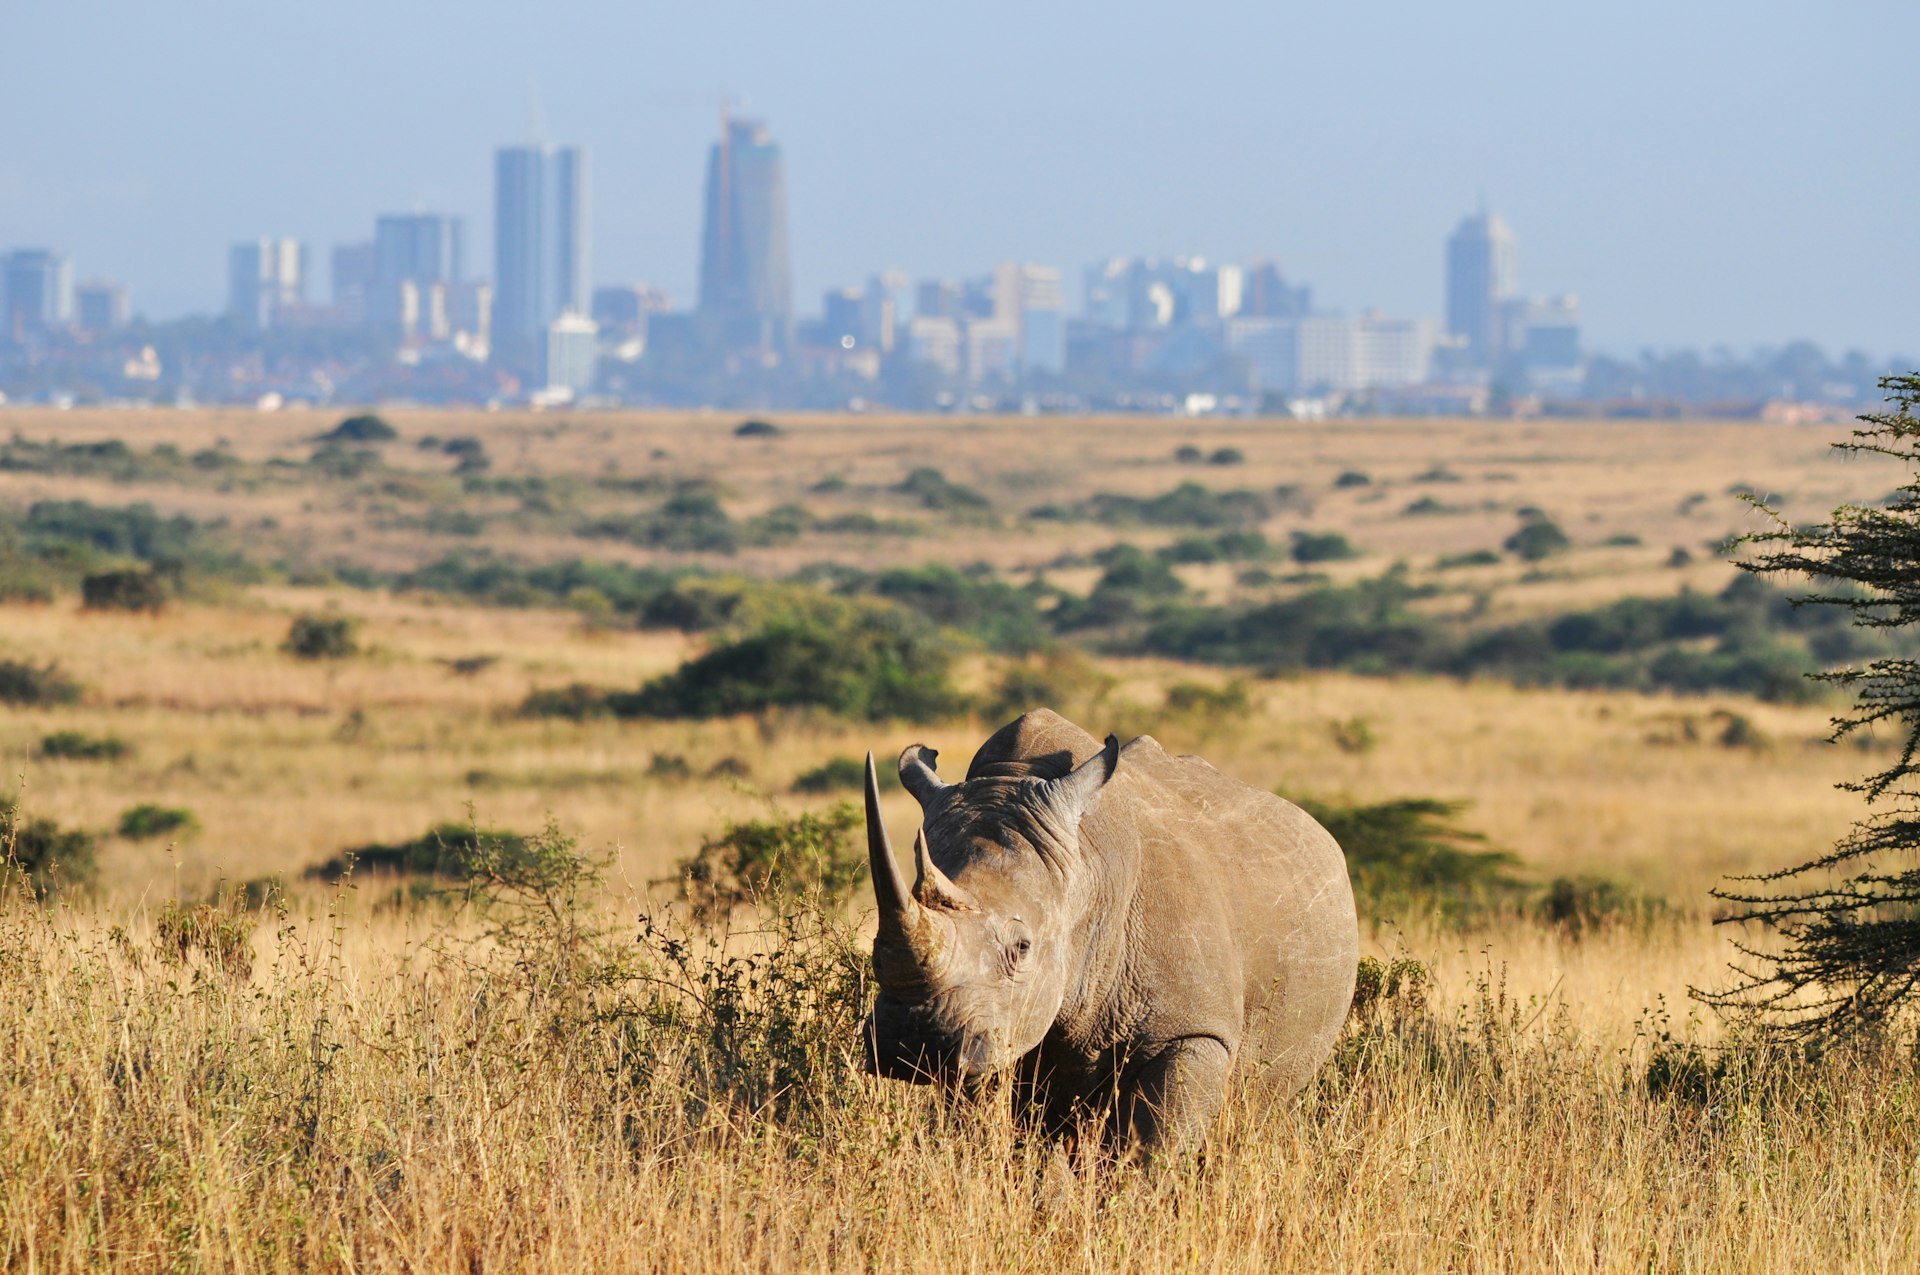 A rhino in open grasslands with the Nairobi skyline in the distance